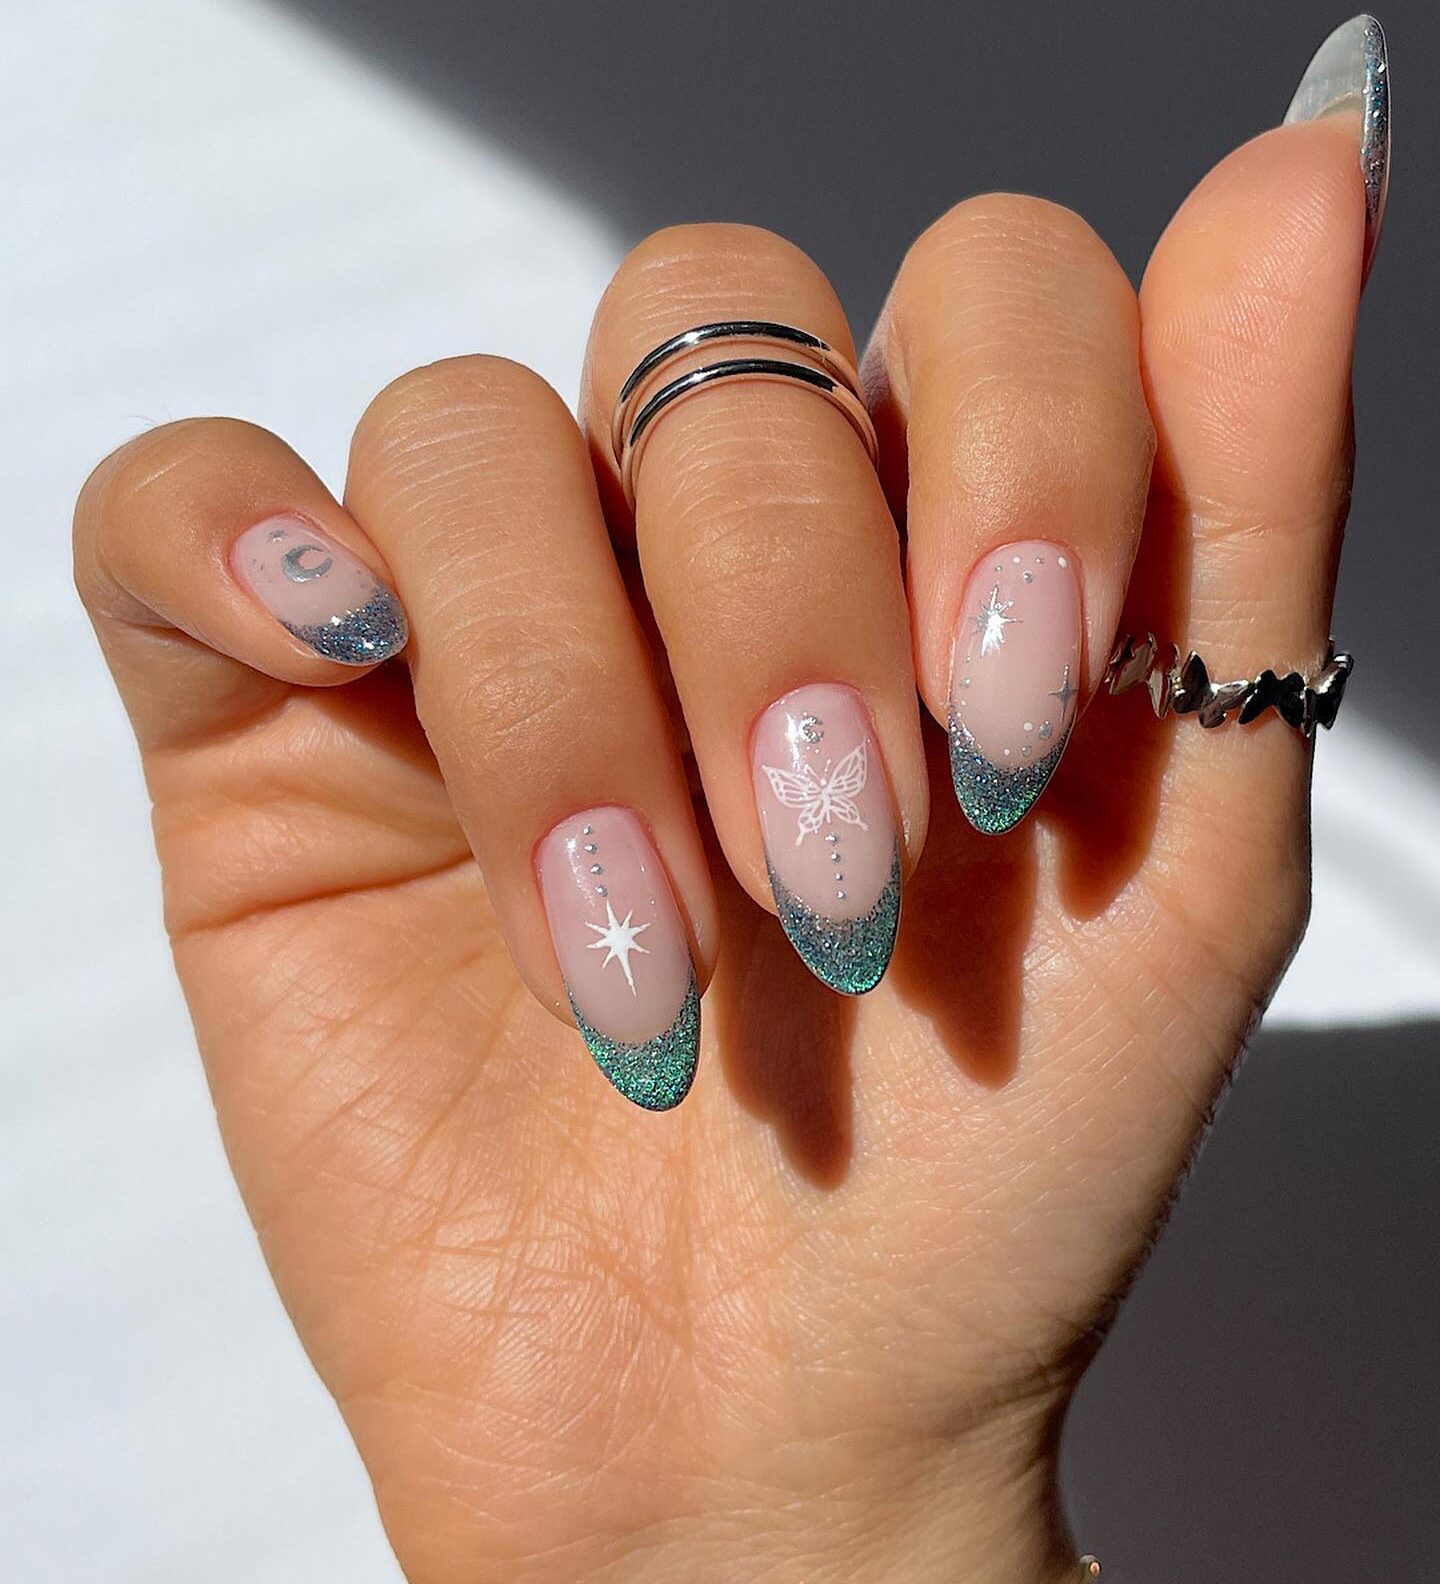 Chrome light blue French tips and celestial elements nail arts on long round nails